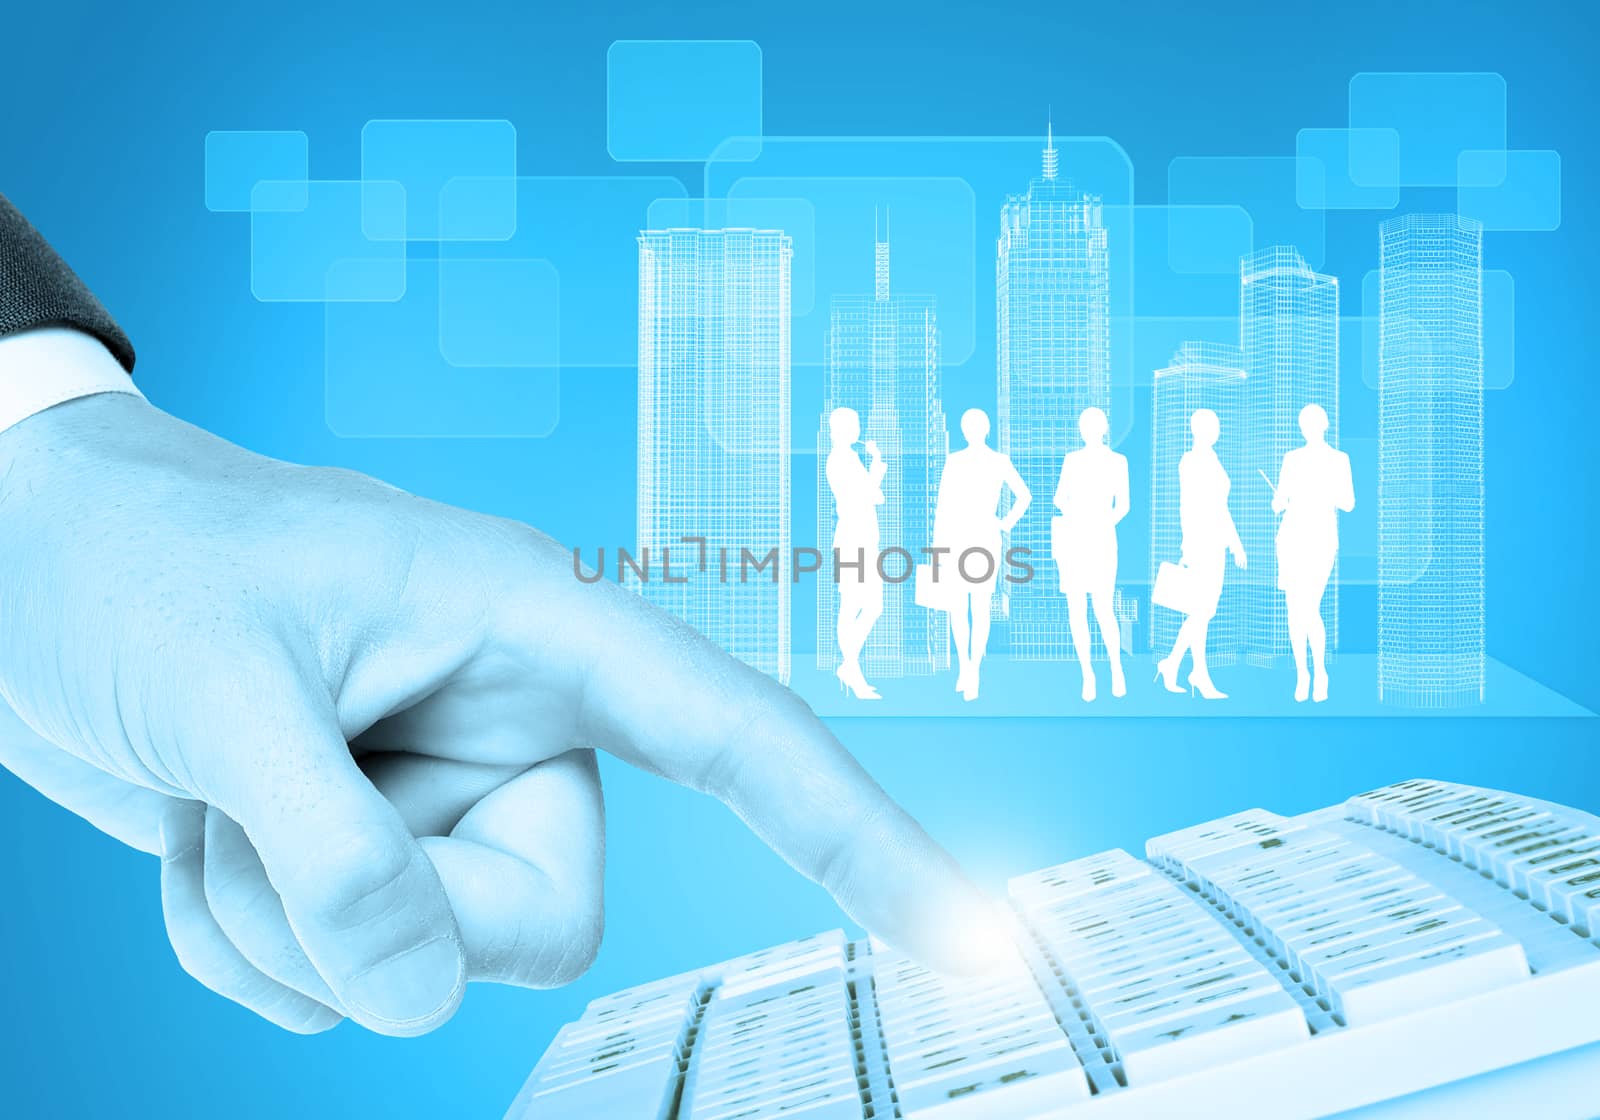 Businessmans right hand touching keyboard on abstract blue background with virtual city and business people silhouettes